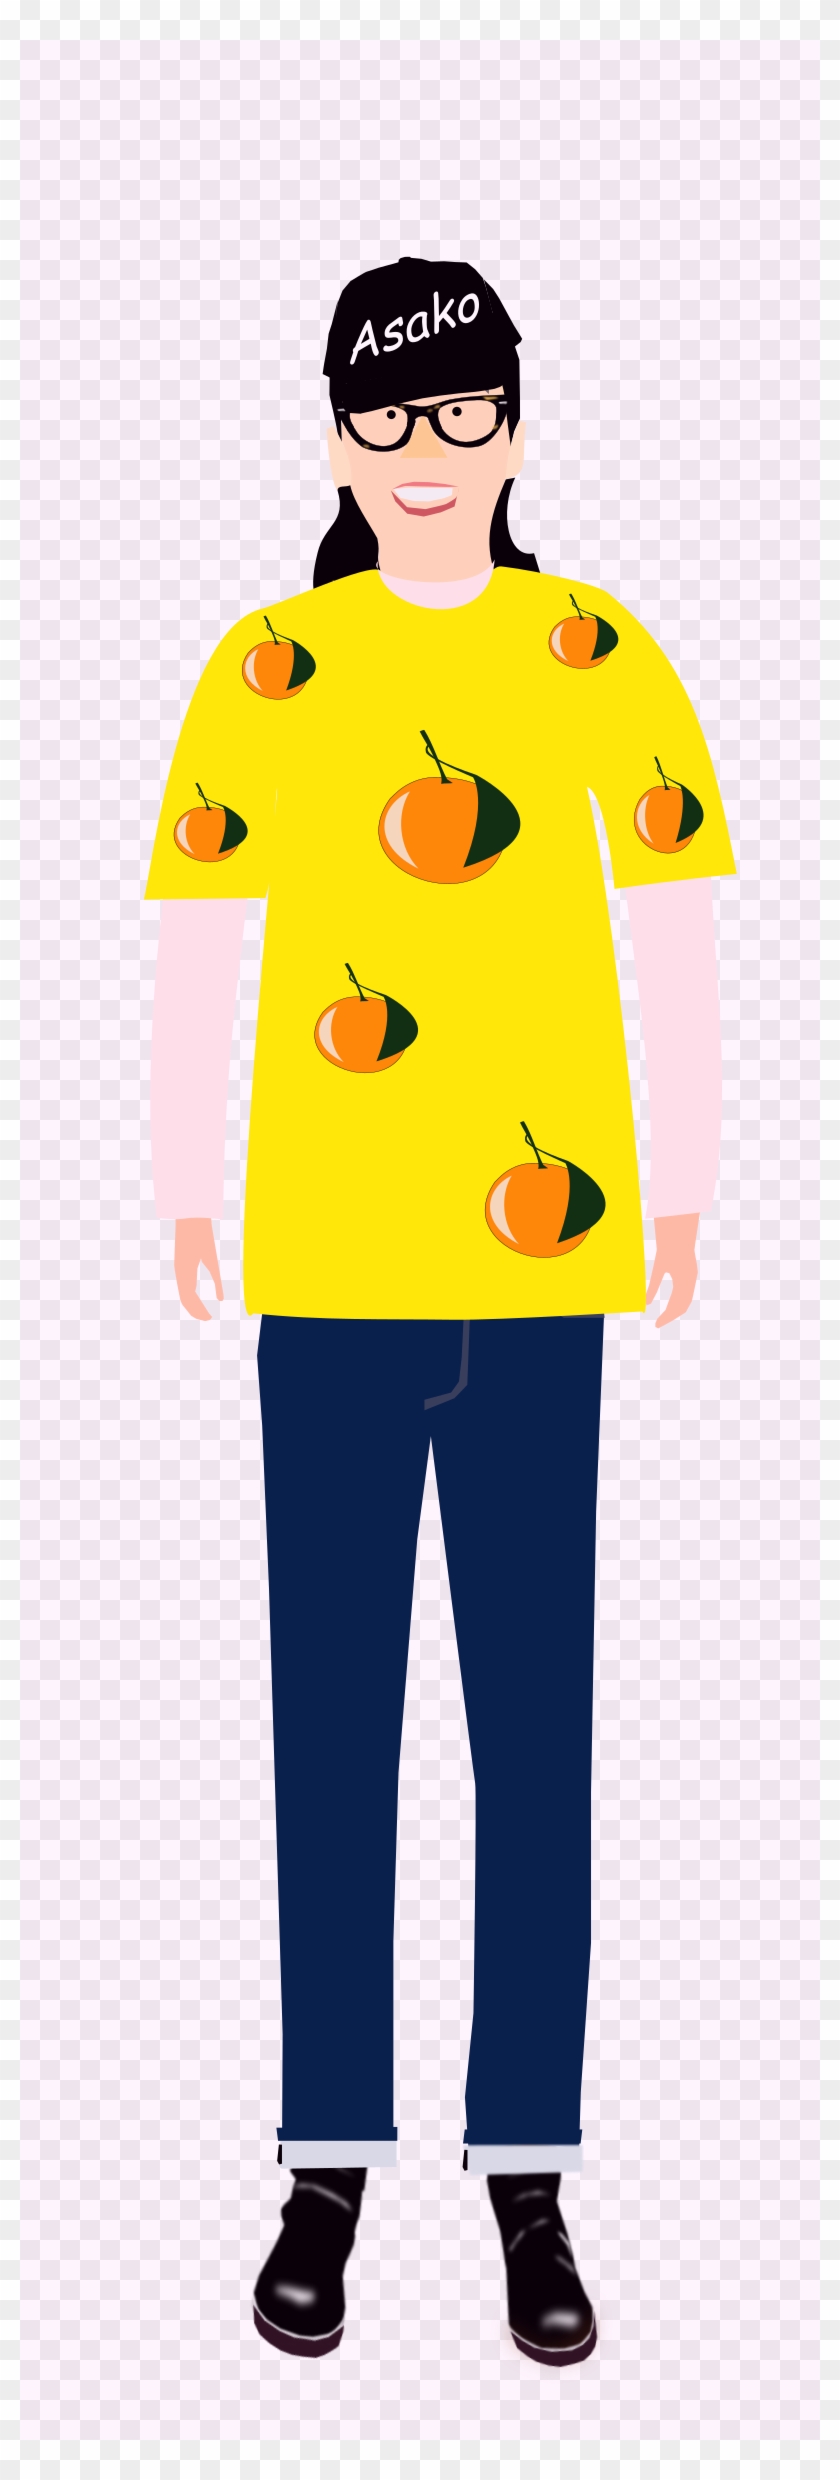 About 3600 Free Commercial & Noncommercial Clipart - T-shirt #1413910